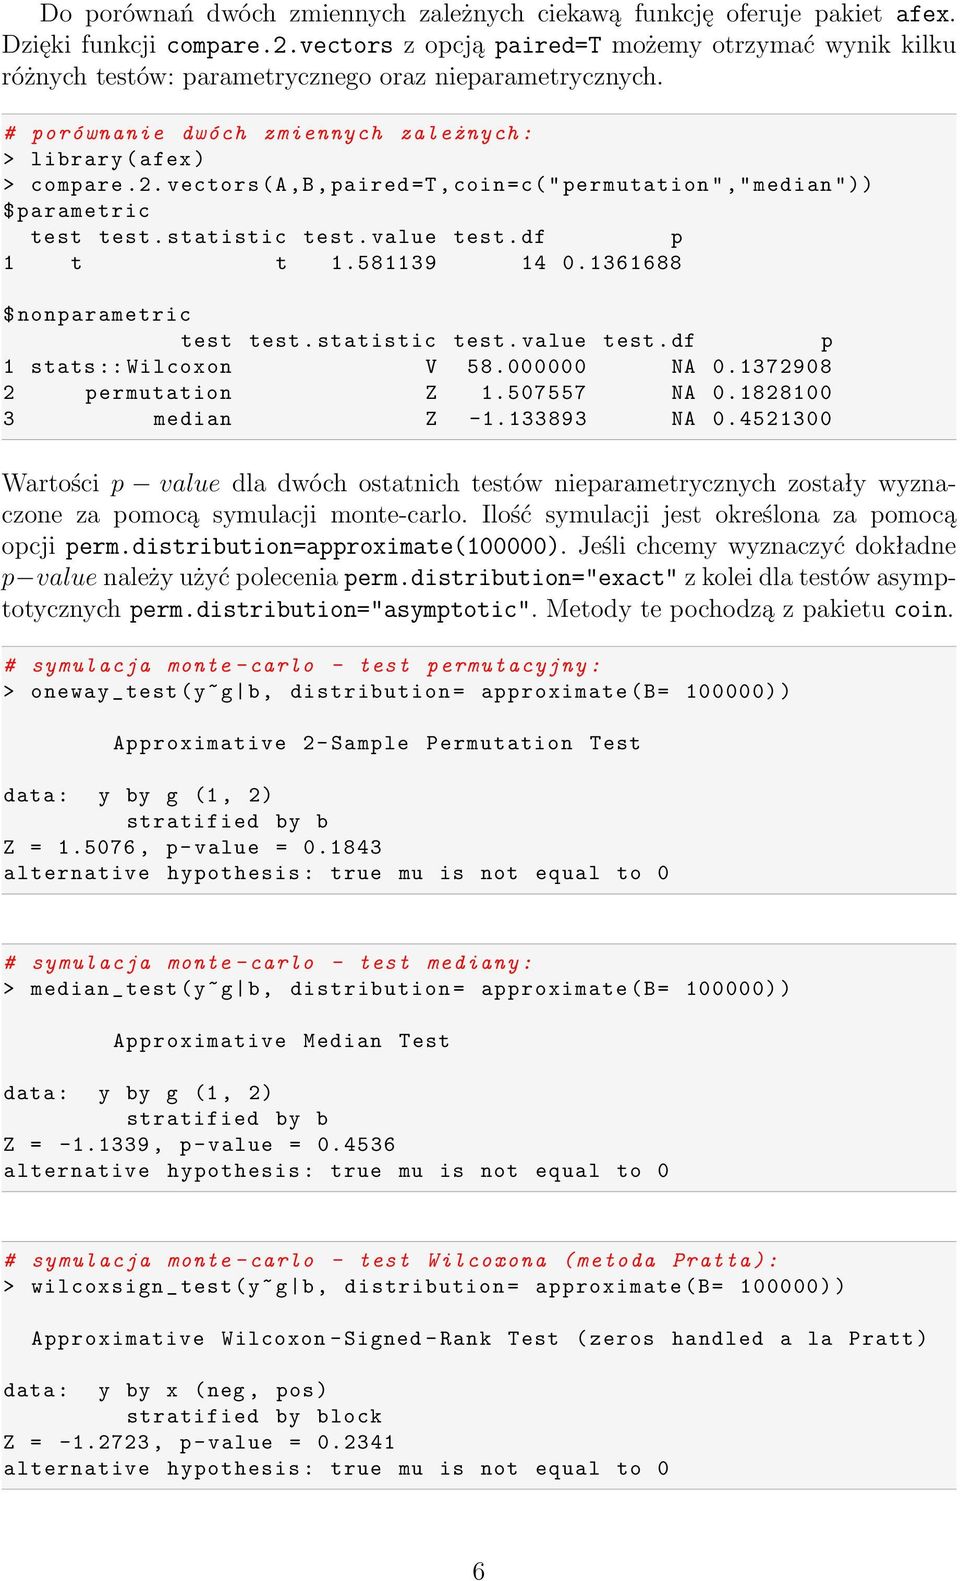 vectors (A,B, paired =T, coin =c(" permutation "," median ")) $ parametric test test. statistic test. value test. df p 1 t t 1. 581139 14 0. 1361688 $ nonparametric test test. statistic test. value test. df p 1 stats :: Wilcoxon V 58.